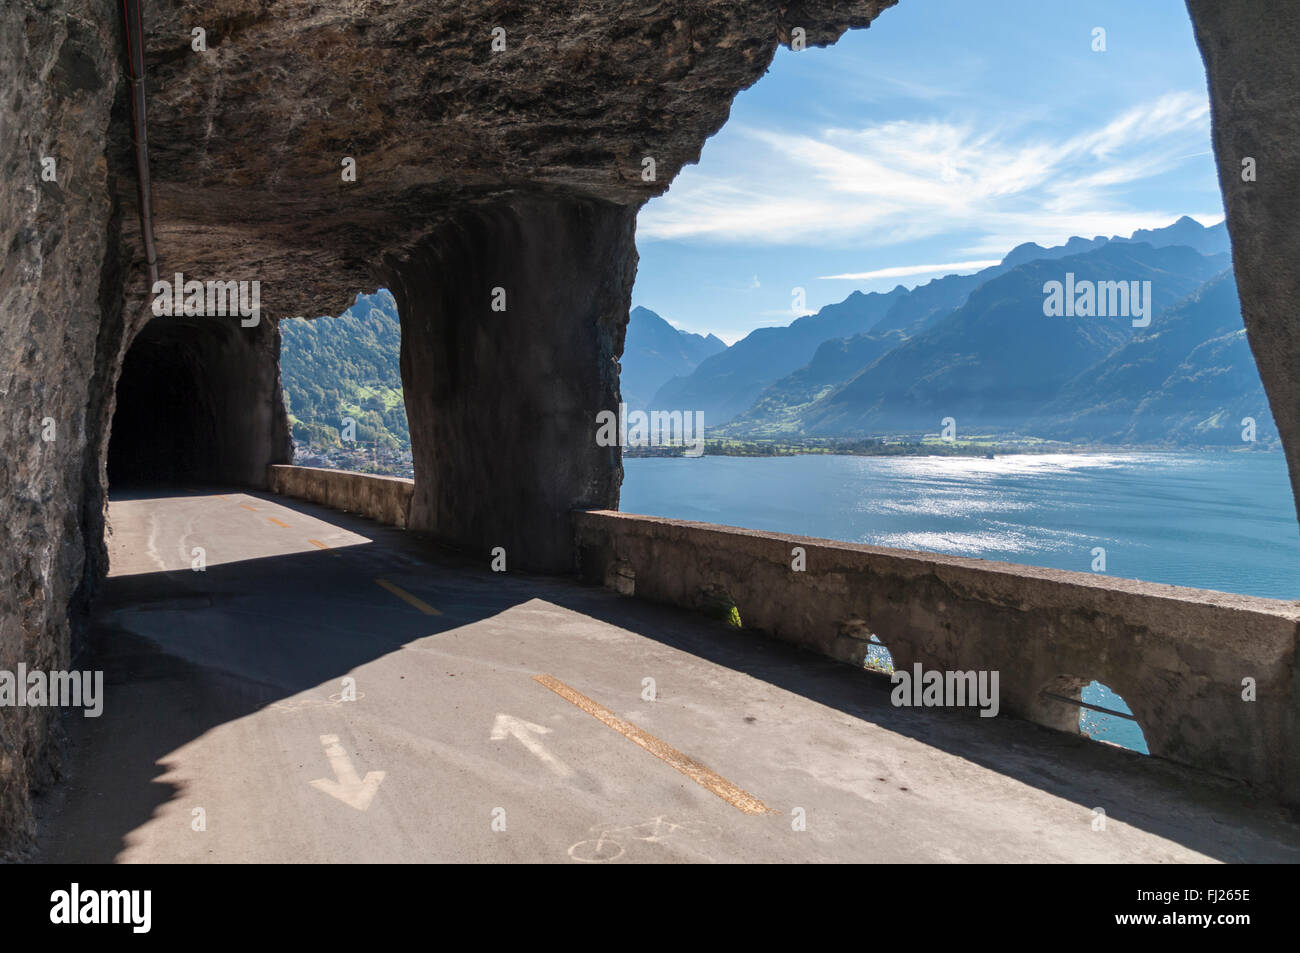 Old Axenstrasse road in a tunnel with large windows offering a view over Lake Lucerne and the Swiss Alps. Stock Photo